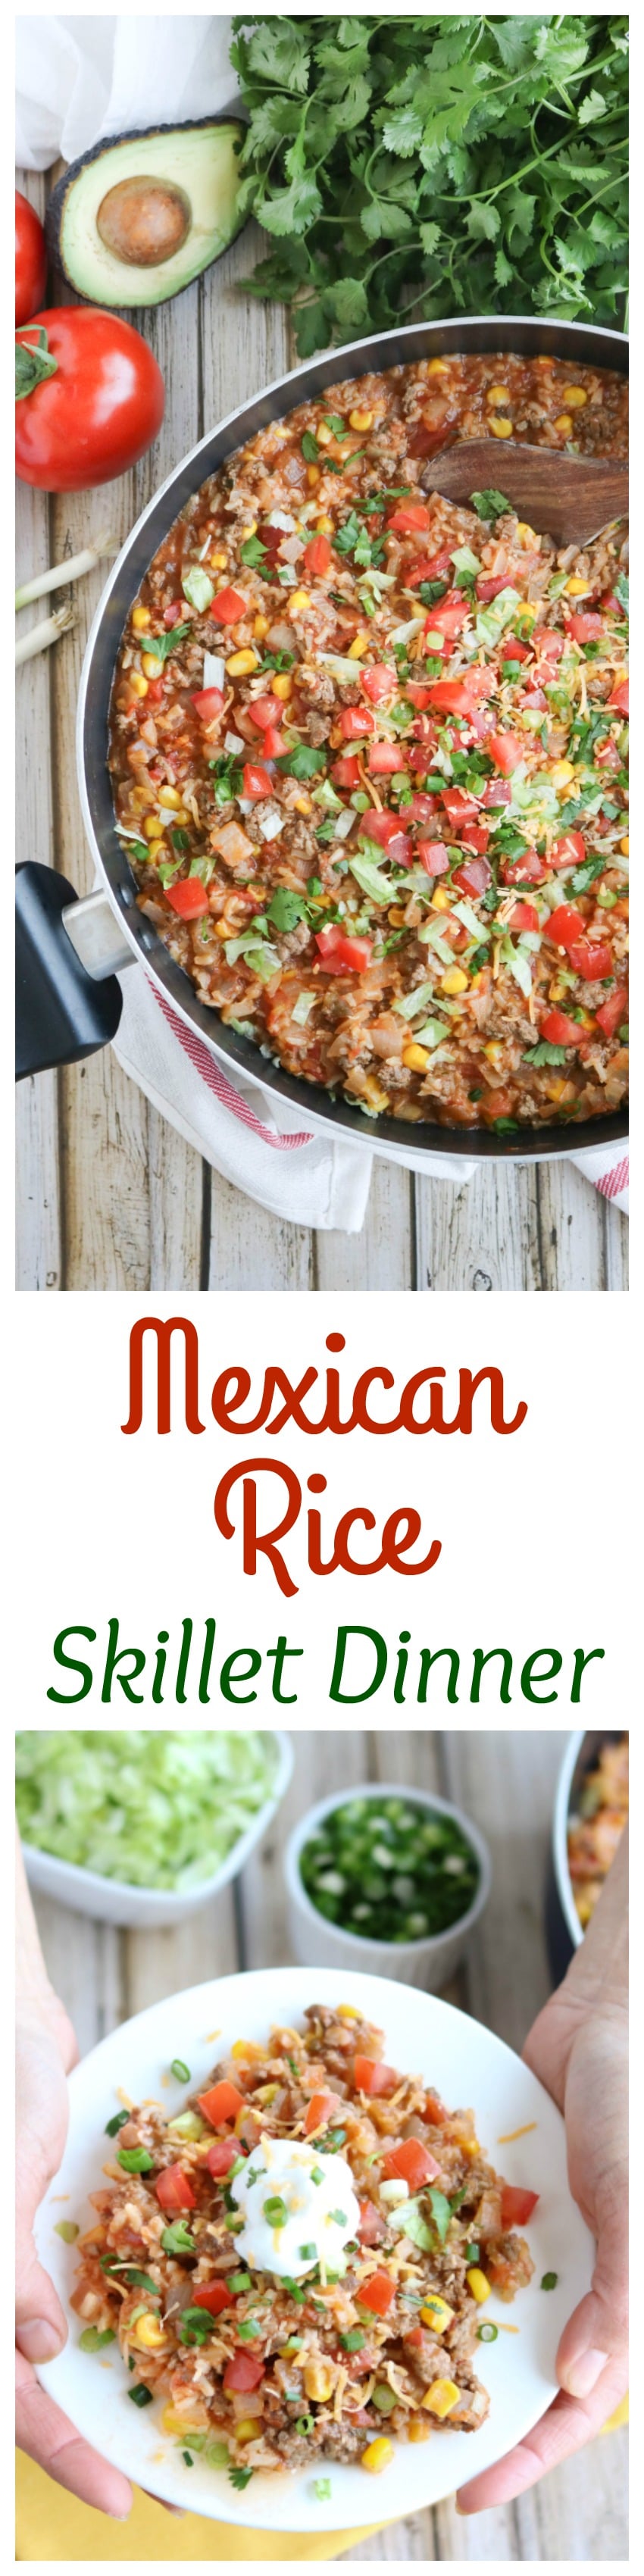 A fun, easy way to shake up the typical Taco night! This Mexican Rice Skillet Dinner is ready in just 30 minutes! Loaded with yummy Tex-Mex flavor, it’s a quick, one-pot dinner recipe your whole family will love! | www.TwoHealthyKitchens.com